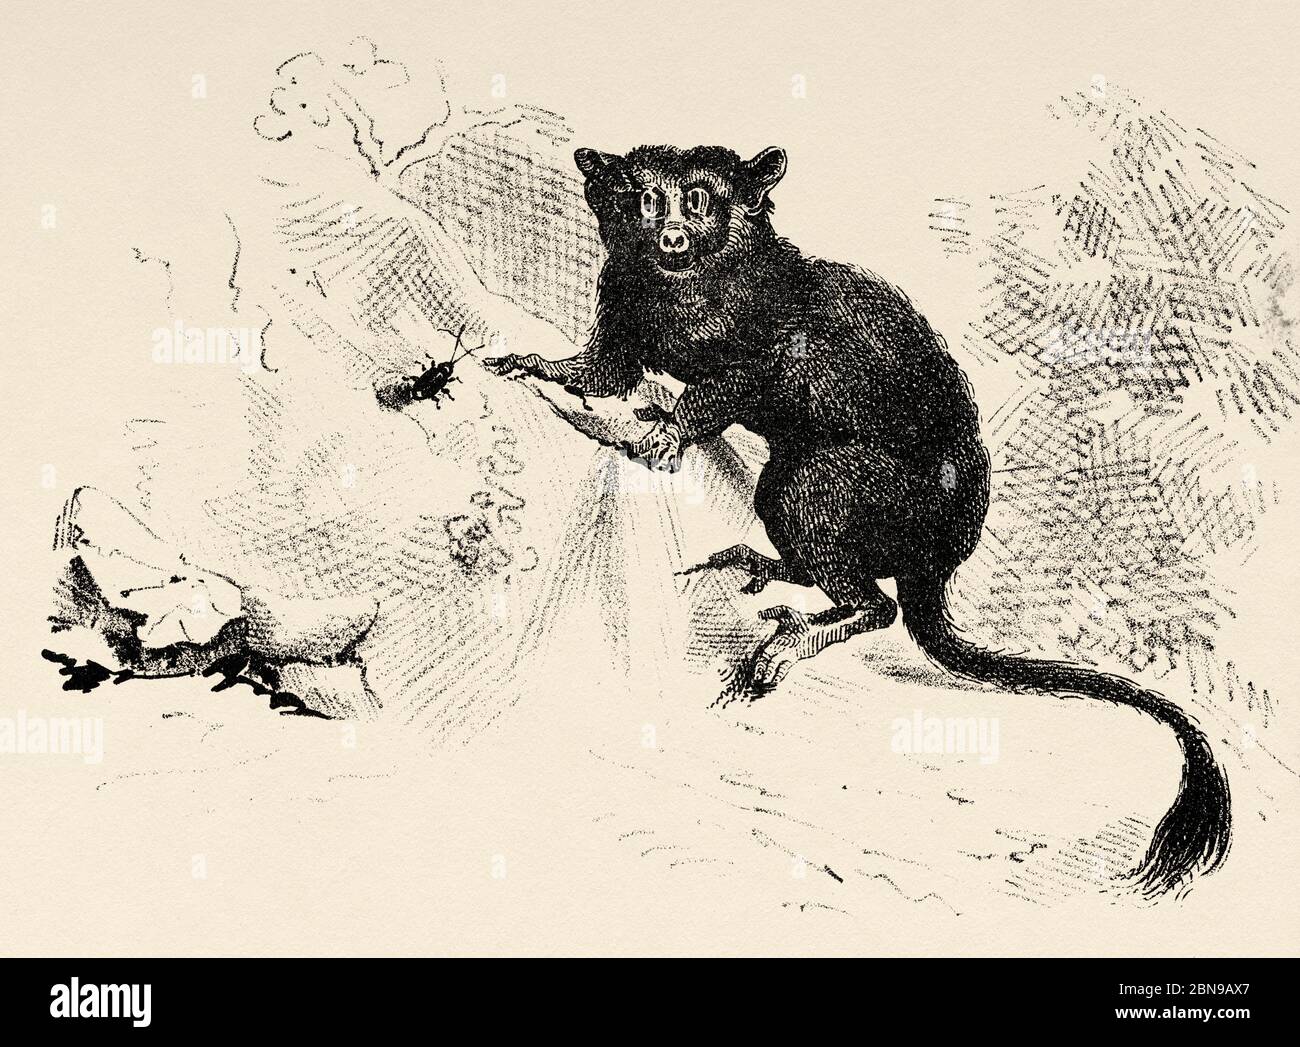 Galágids (Galagidae) family of strepsirrhine primates known as galagos. Small nocturnal animals of Africa. Old engraved animal illustration 19th century Stock Photo